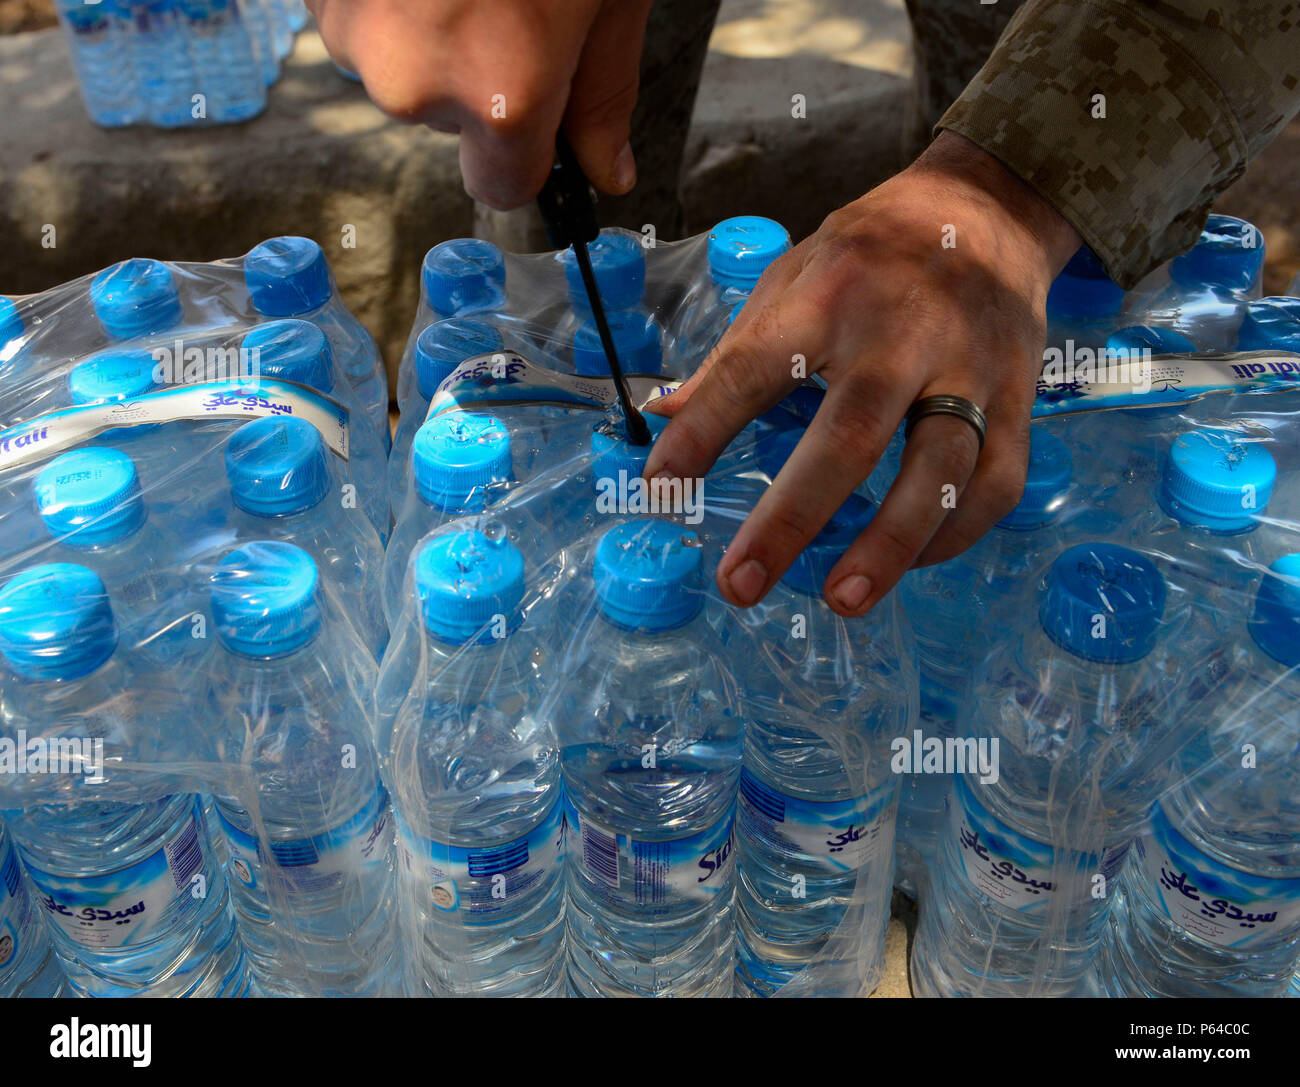 A U.S. Marine Corps Marine punches holes in the tops of water bottles prior to a non-lethal weapons class where the participants were sprayed with OC pepper spray during AFRICAN LION 16 at Tifnit, Kingdom of Morocco, April 23, 2016. The U.S. Marine Forces Europe-Africa and Kingdom of Morocco-led joint exercise provided familiarization with various military techniques from 11 different countries and provided an opportunity to become more familiar with allied nations’ tactics to ease synchronization.  (U.S. Air Force photo by Senior Airman Krystal Ardrey/Released) Stock Photo